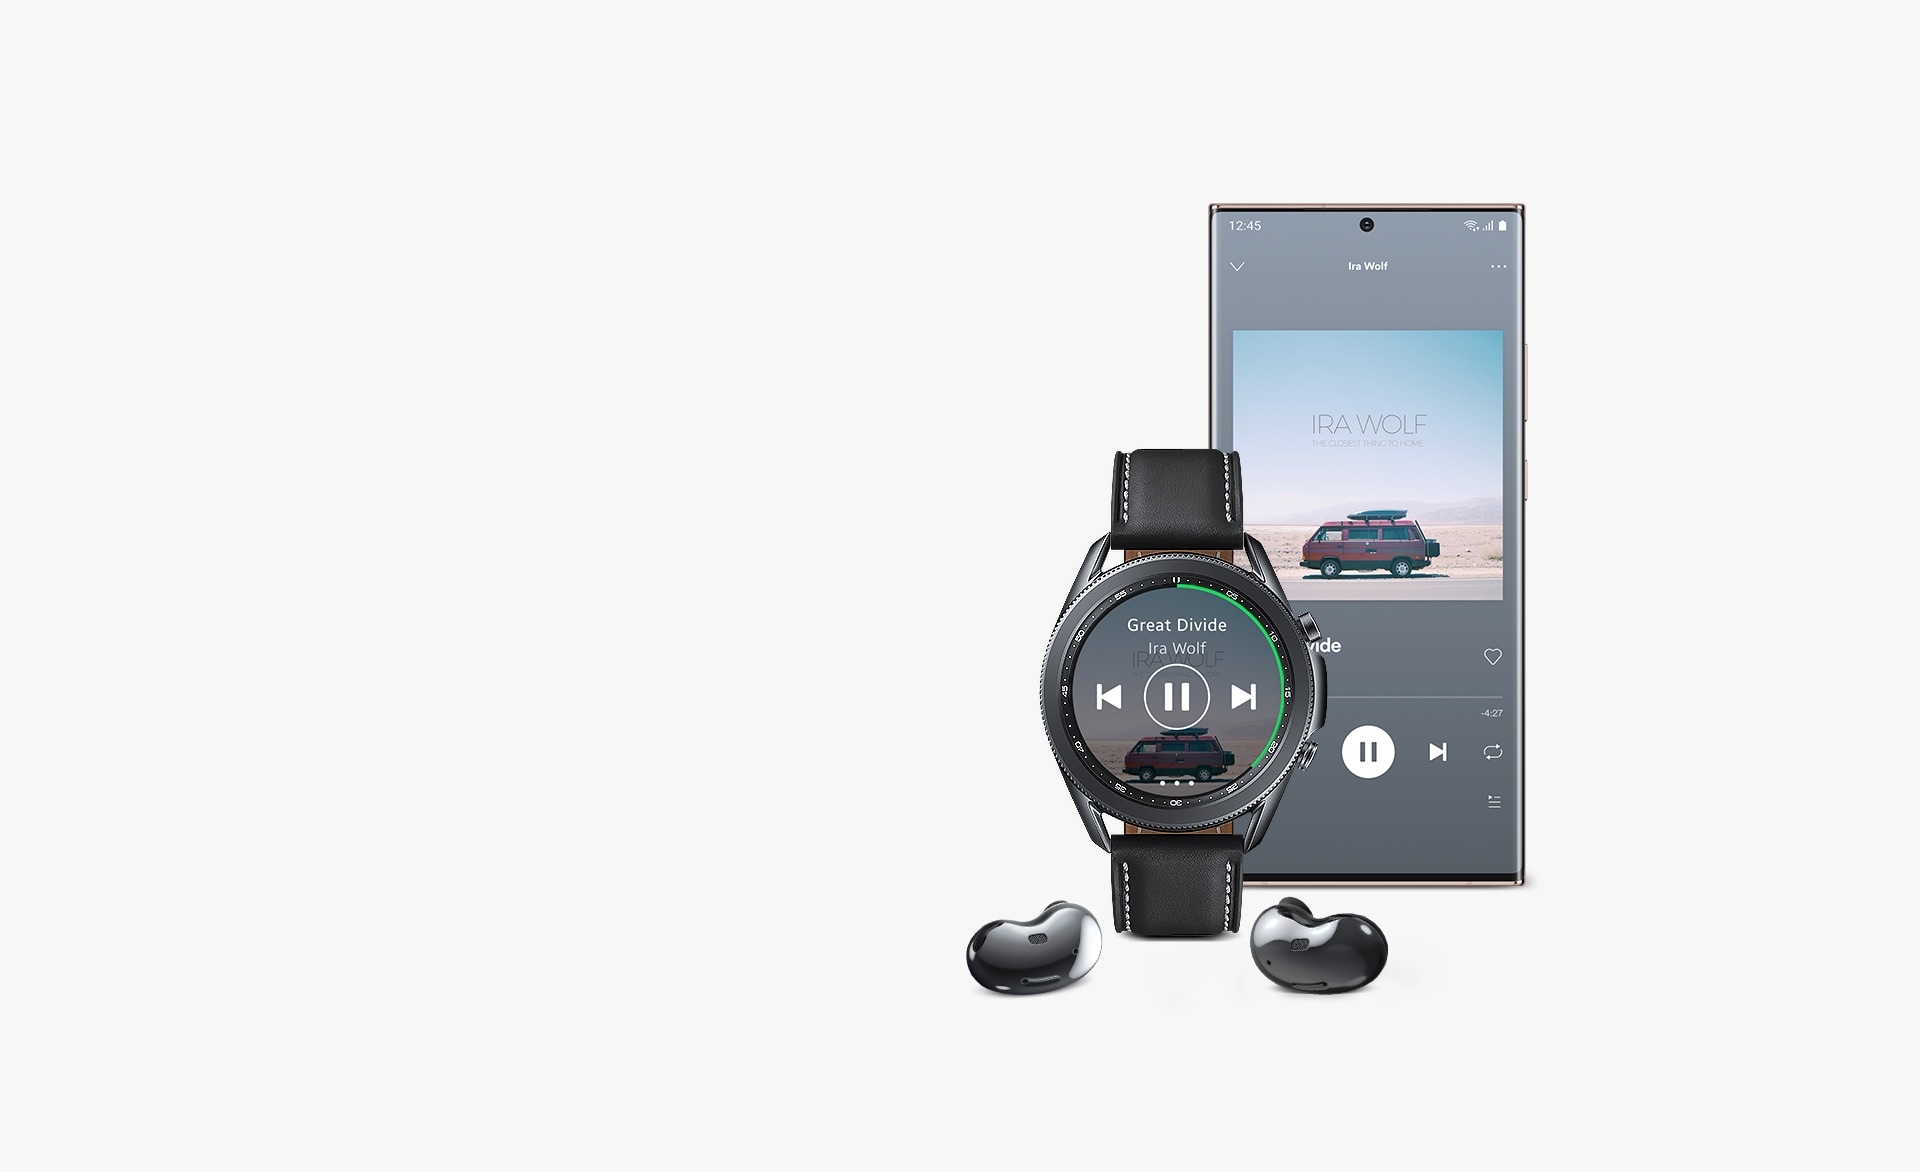 Front view of 45mm Galaxy Watch3 in Mystic Black next to a Galaxy smartphone and Galaxy Buds Live. The watch and smartphone display the same Spotify GUI, showing how you can play music on Galaxy Buds Live and seamlessly control it through Galaxy Watch3.